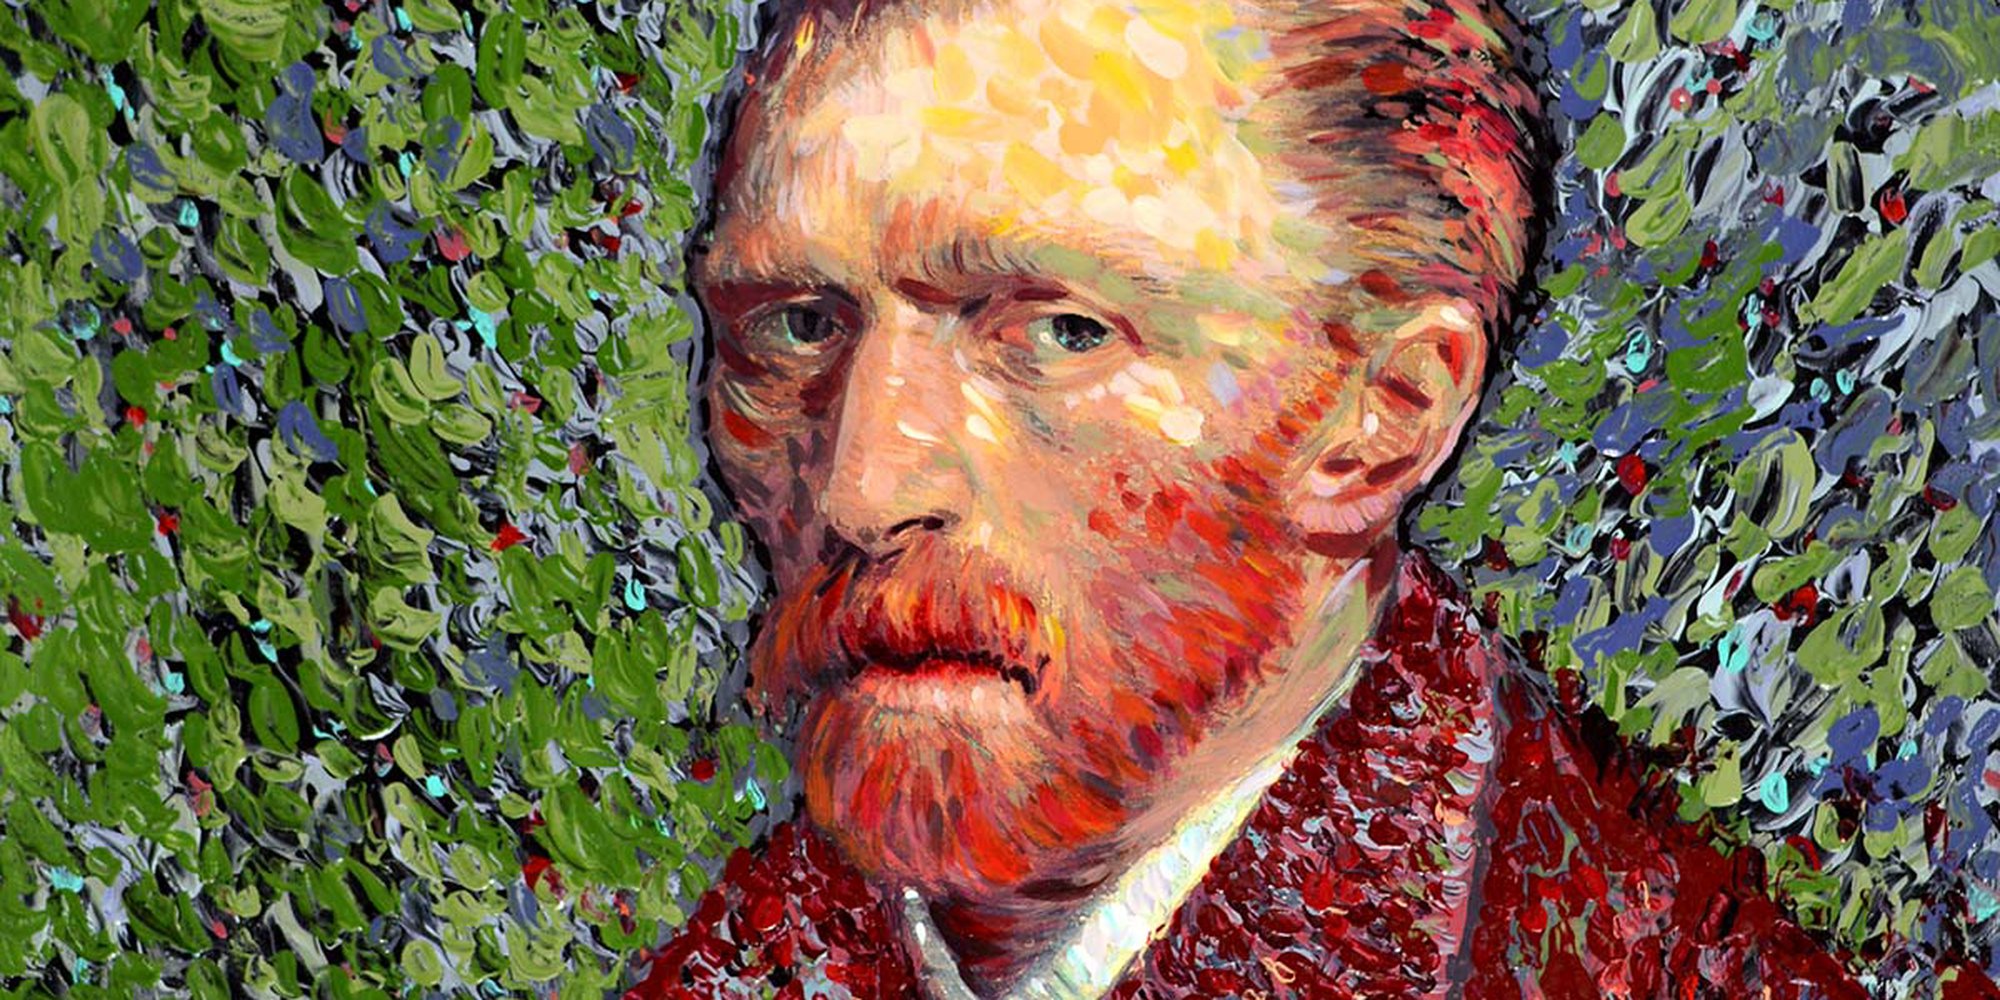 The enigmatic world of Vincent Van Gogh